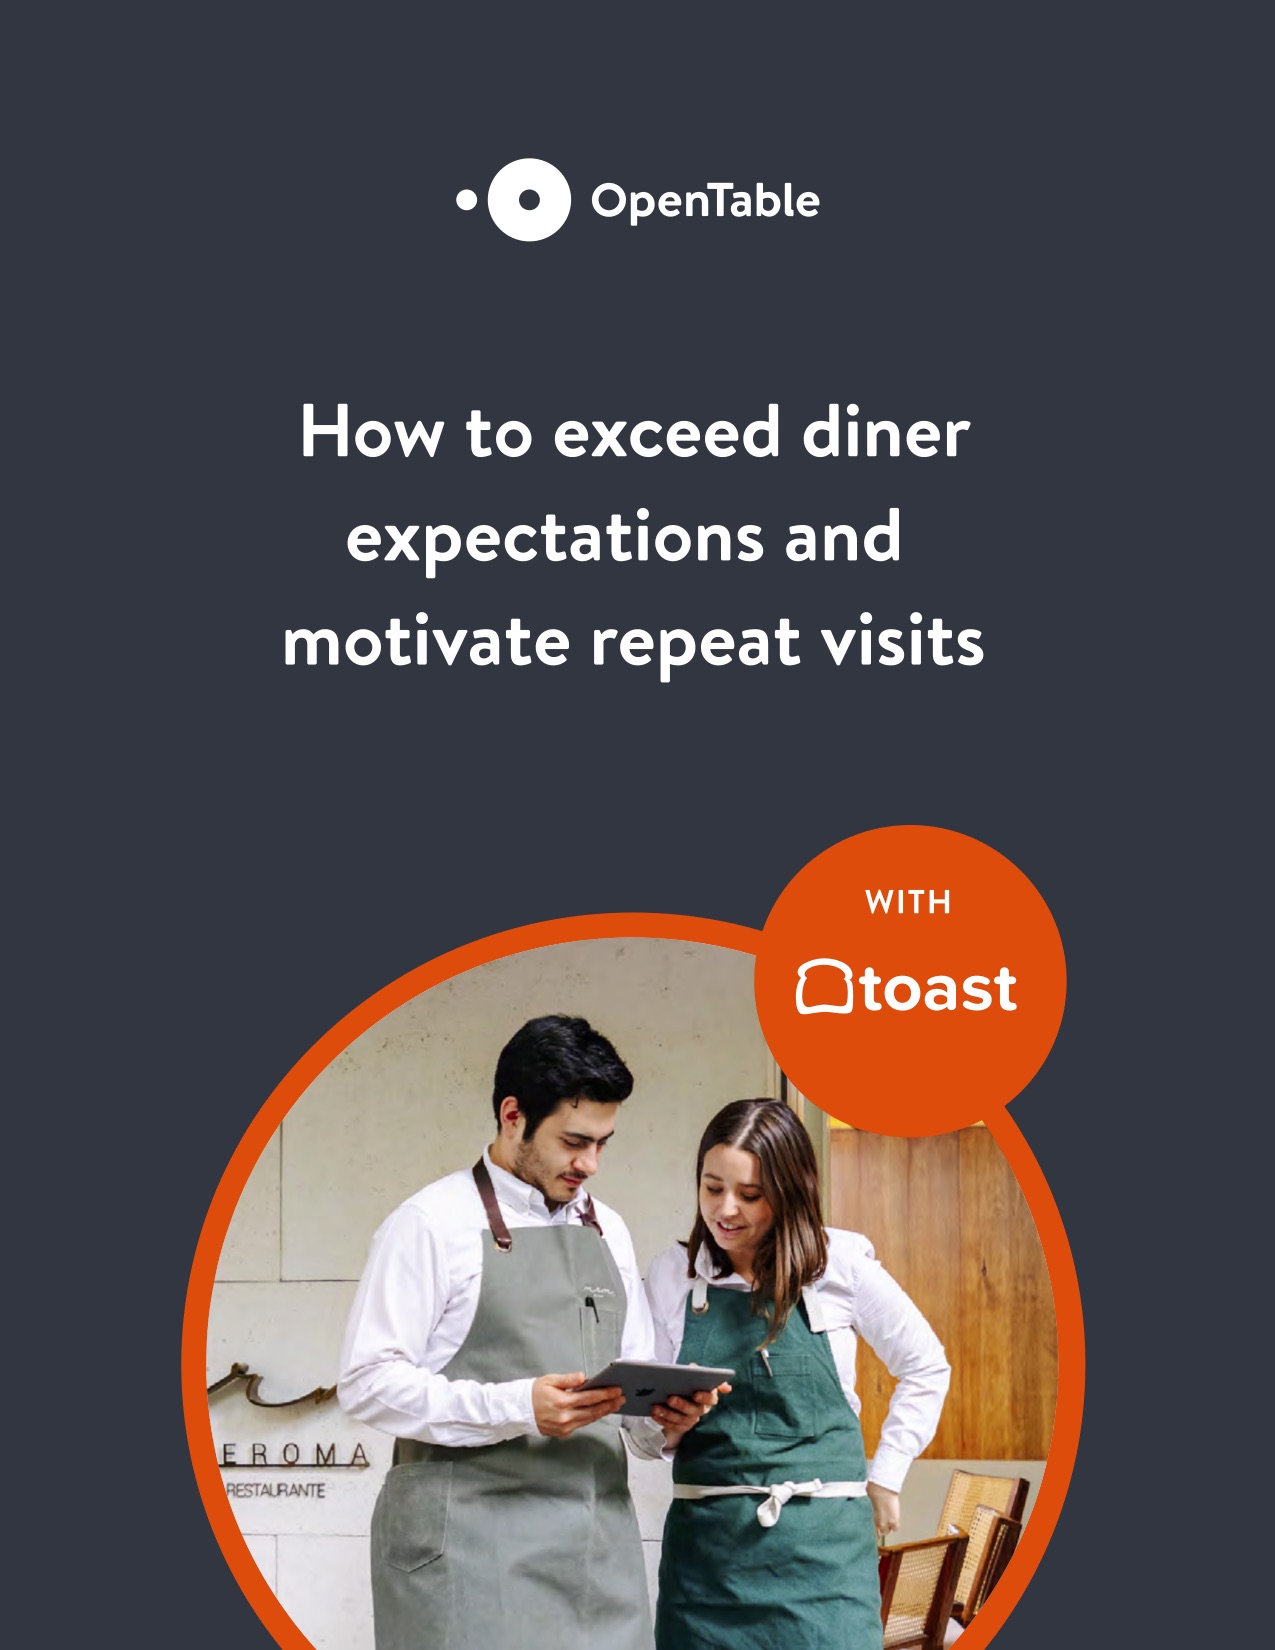 How to get more OpenTable reviews (and stand out)